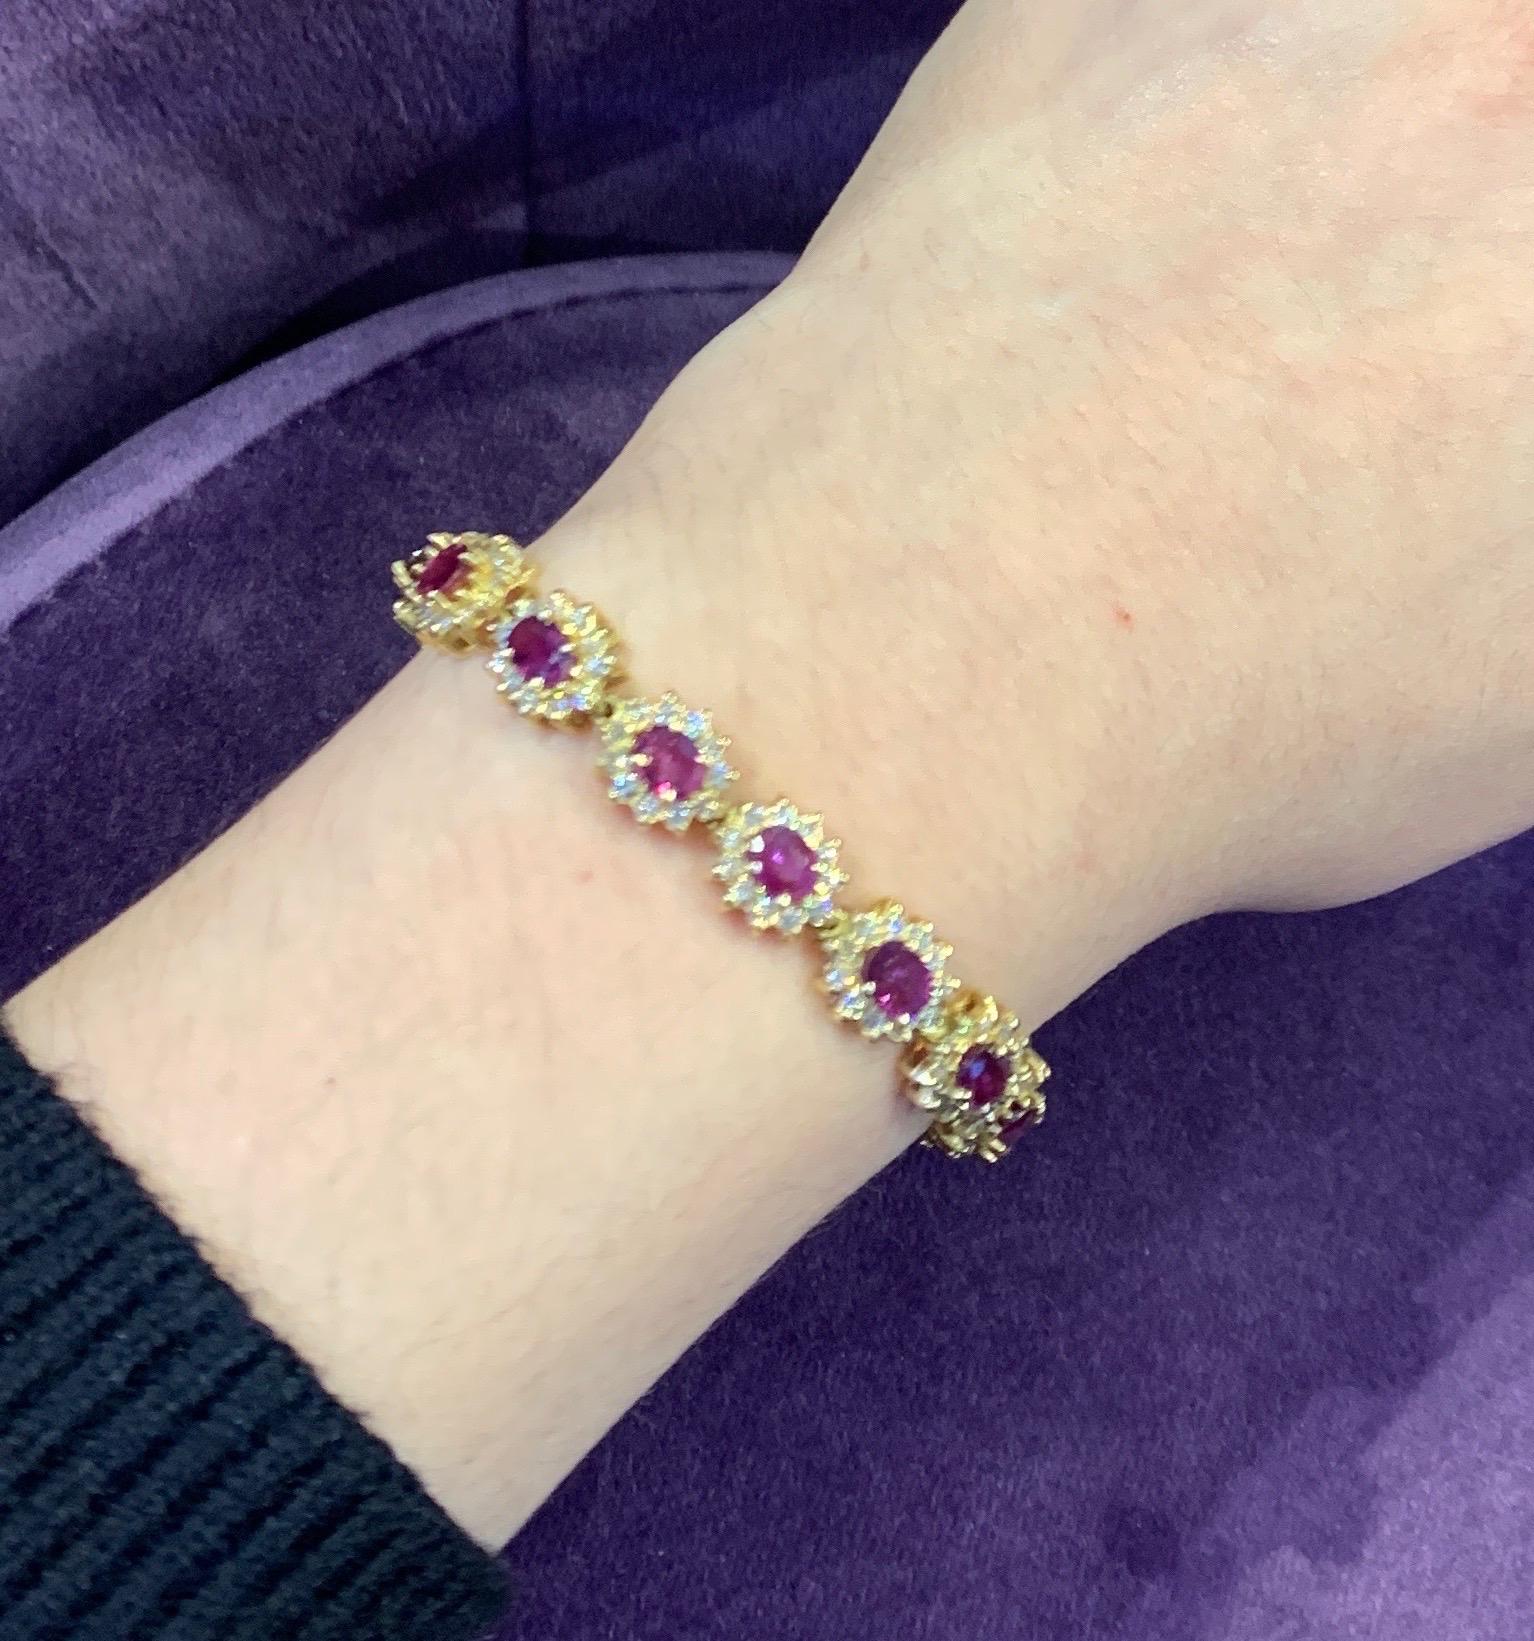 Ruby and Diamond Bracelet 

Yellow gold bracelet set with 18 oval rubies and 198 round diamonds. 

Metal Type: 14-karat gold

Approx. ruby weight: 6.12 carats
Approx. combined diamond weights: 3.96 carat
Approximate Length: 7.5